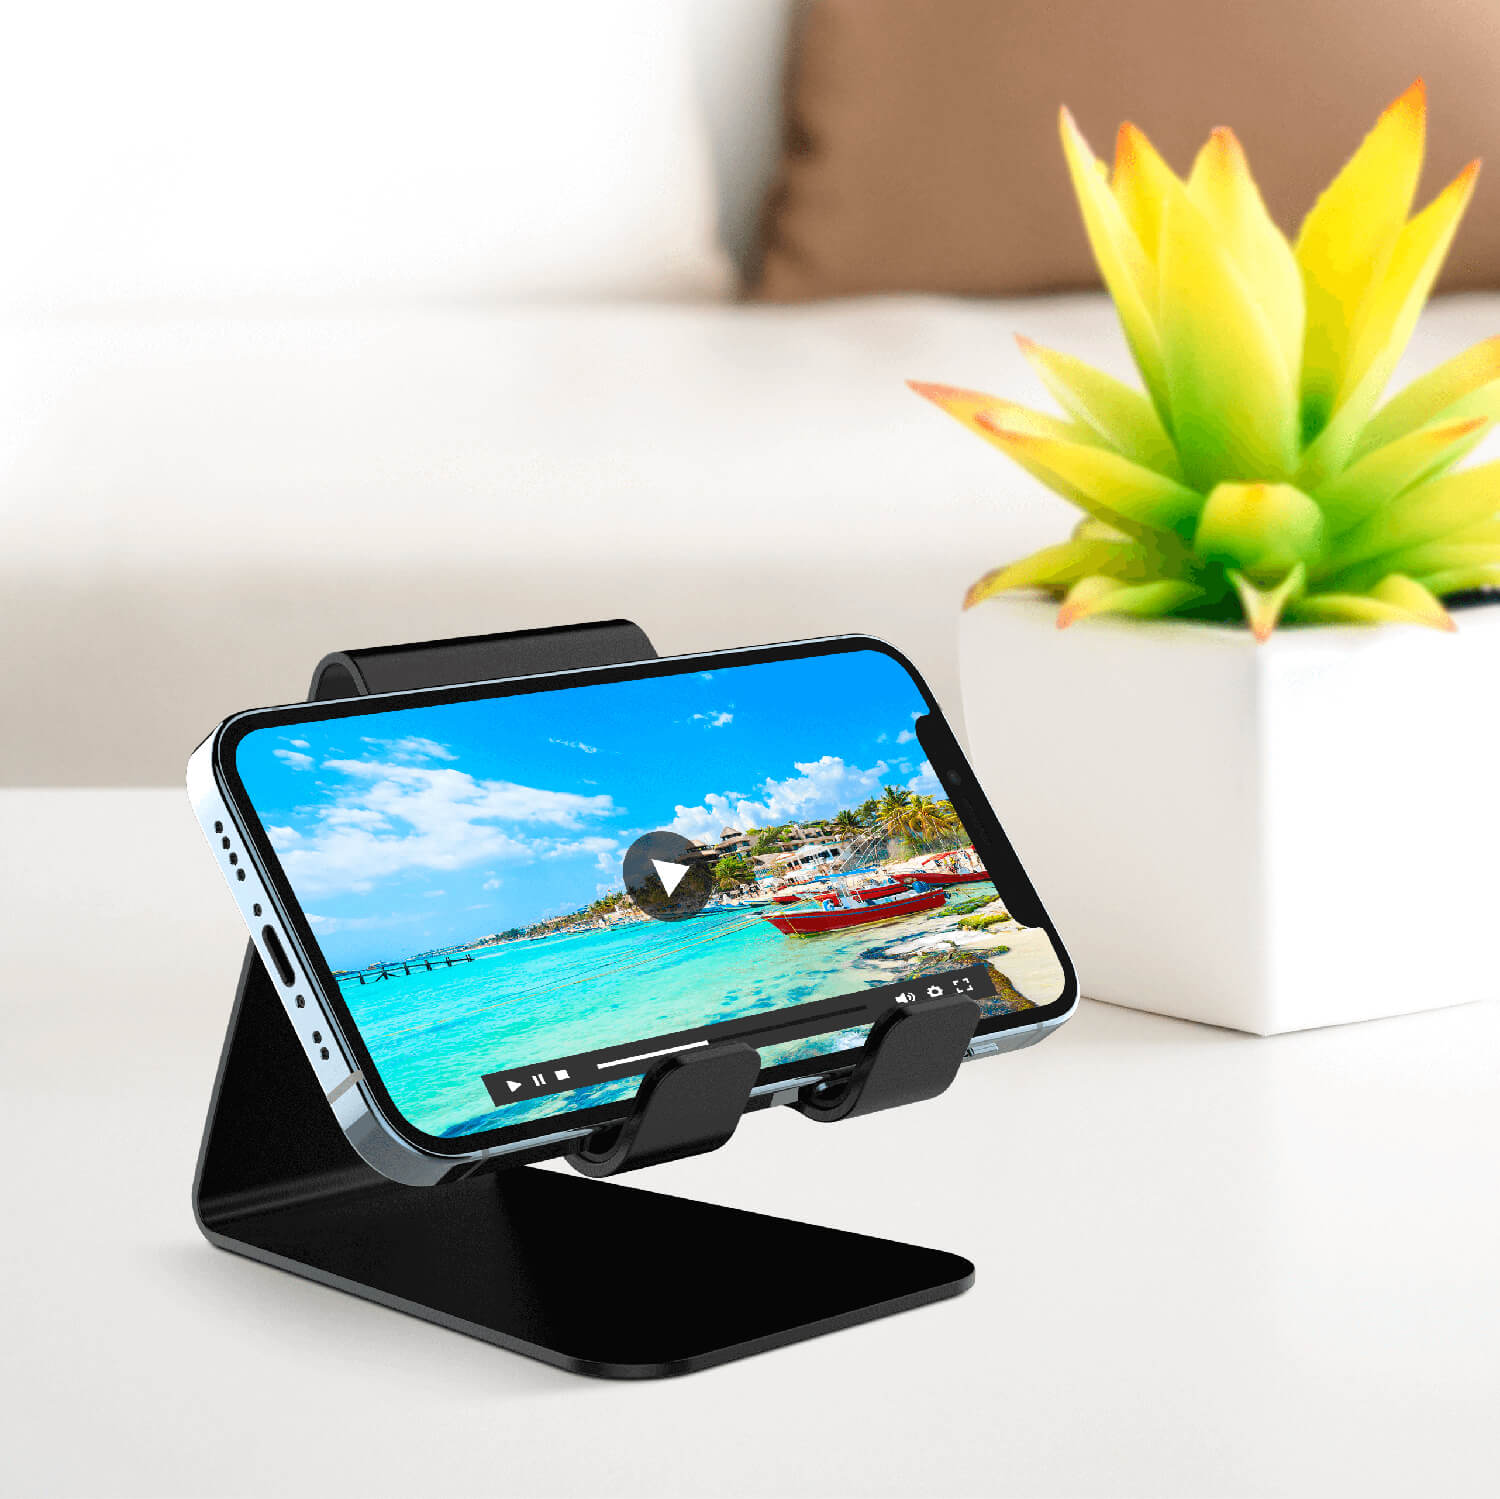 S3 Mini Mobile Stand - Strong Built Quality